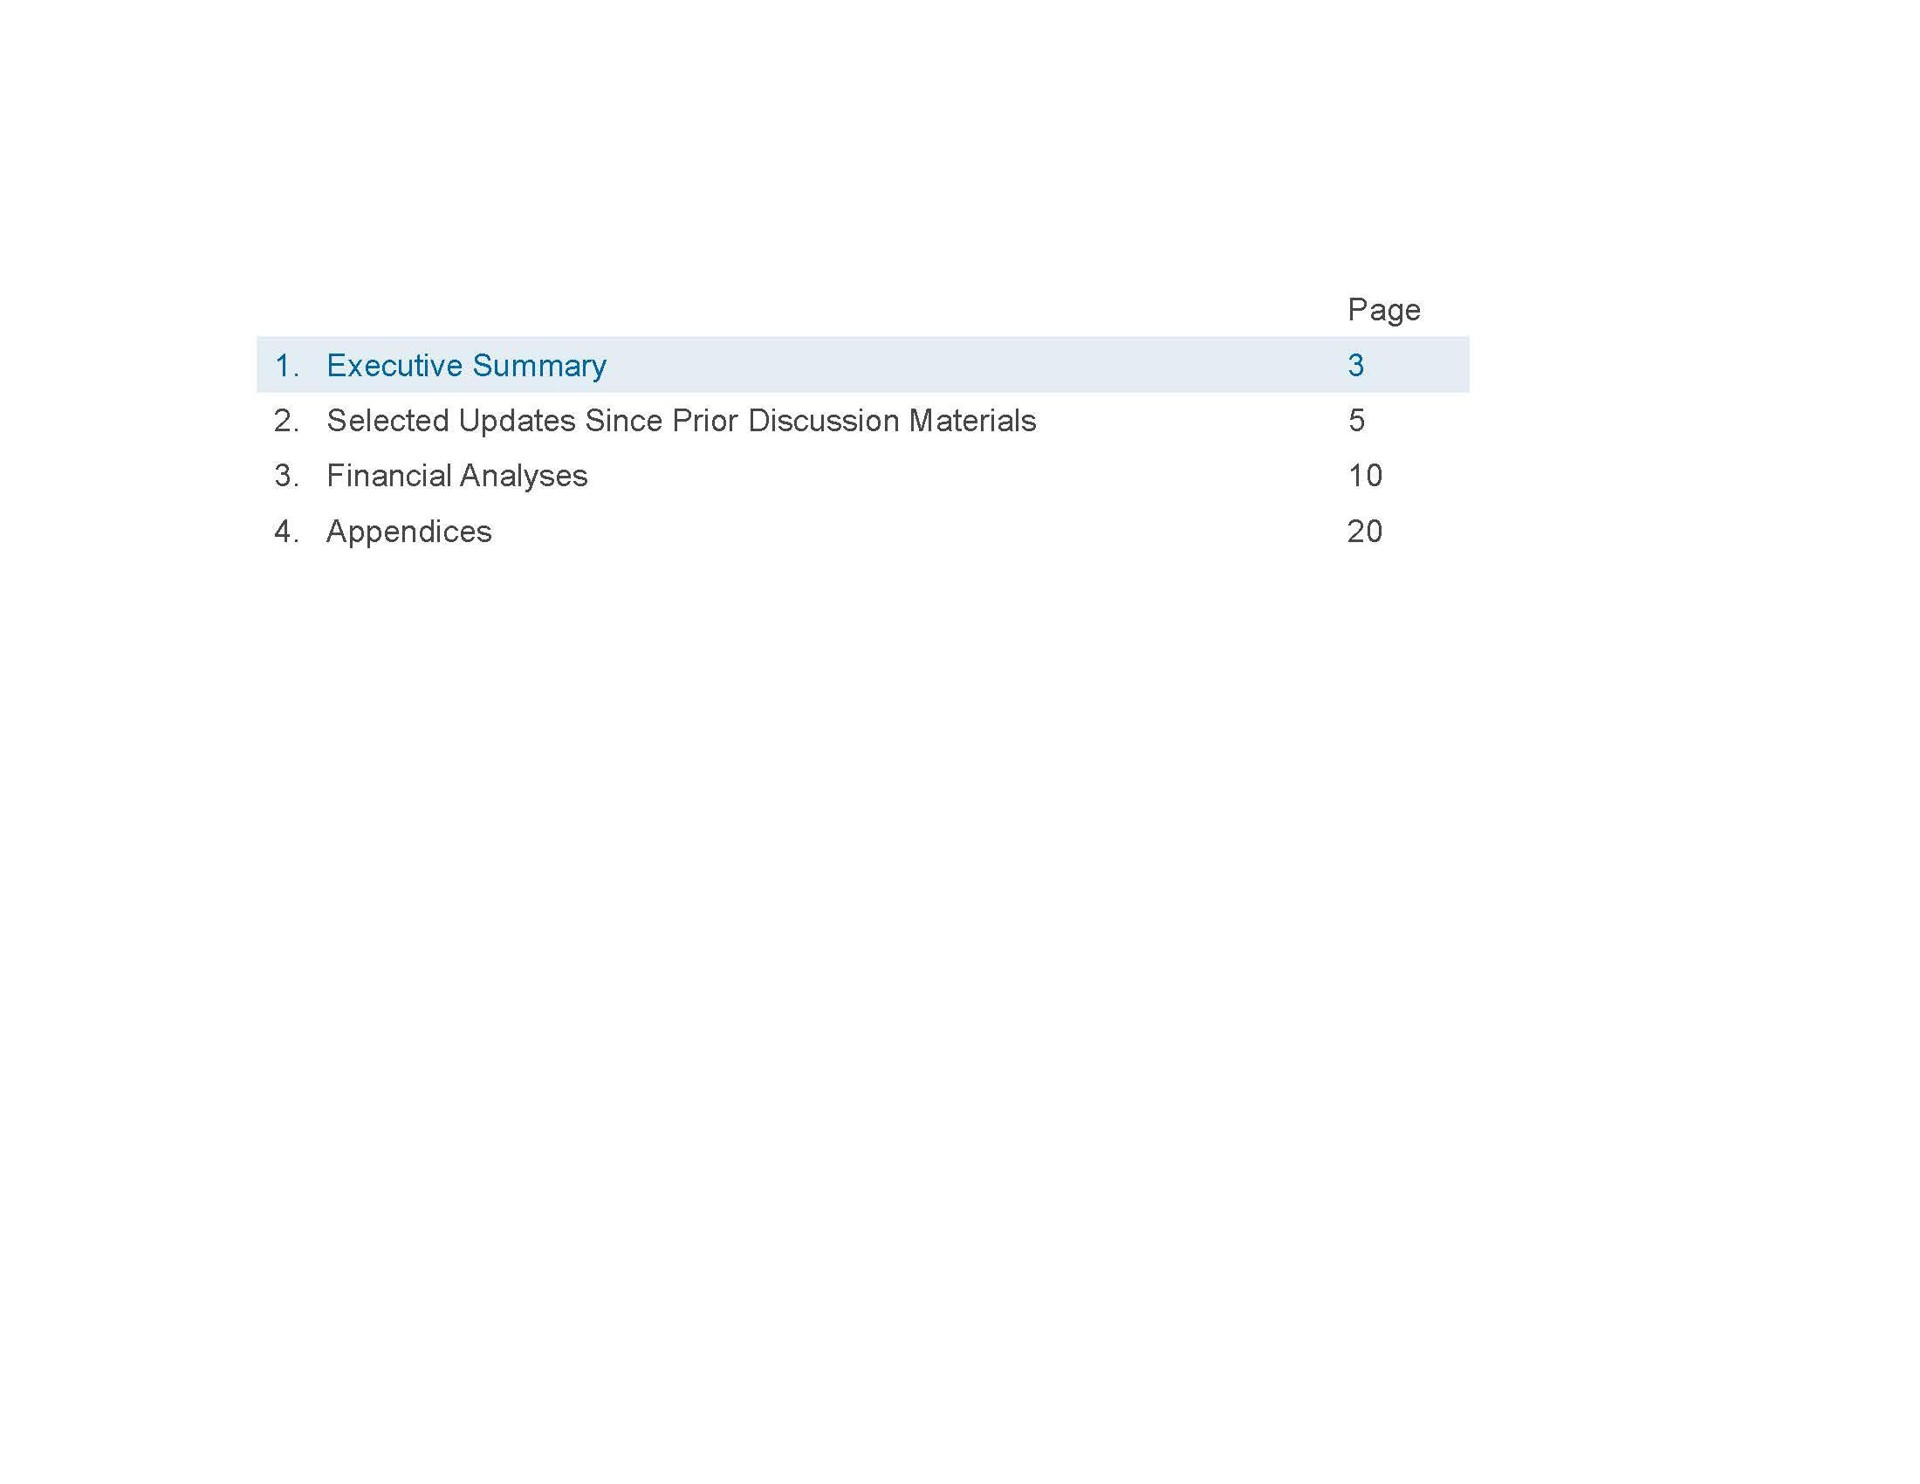 executive summary selected updates since prior discussion materials financial analyses appendices page | Houlihan Lokey